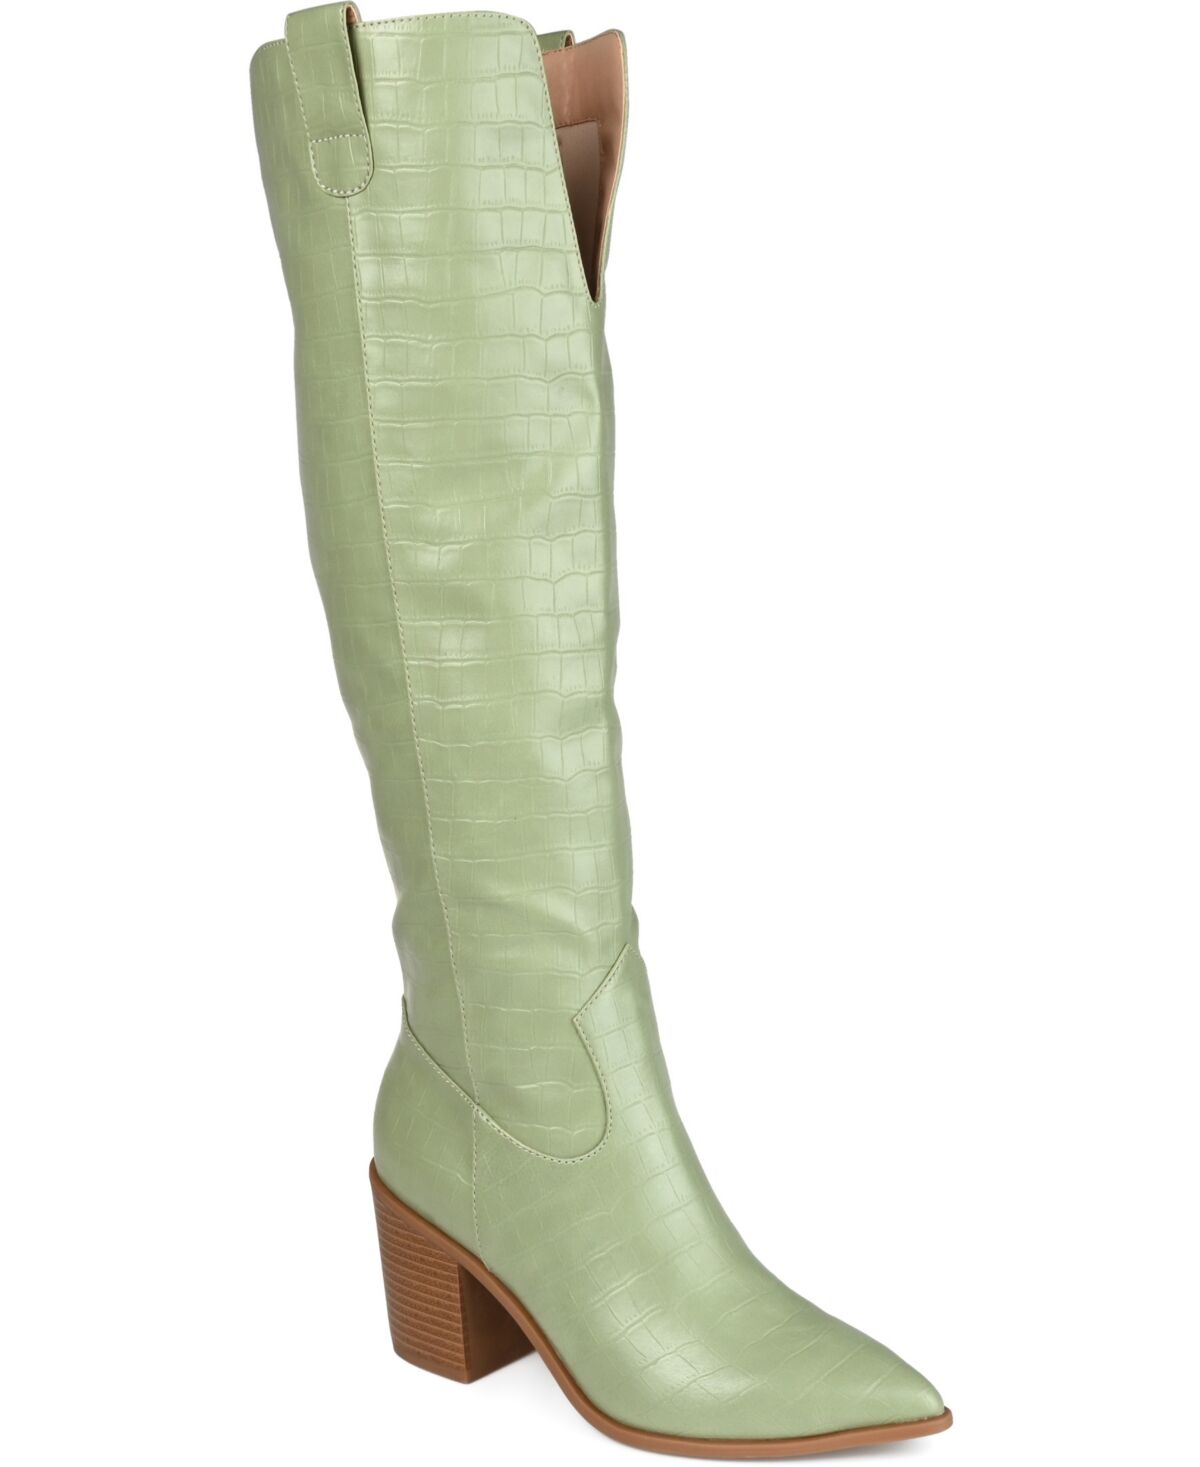 Journee Collection Women's Therese Extra Wide Calf Knee High Boots - Green